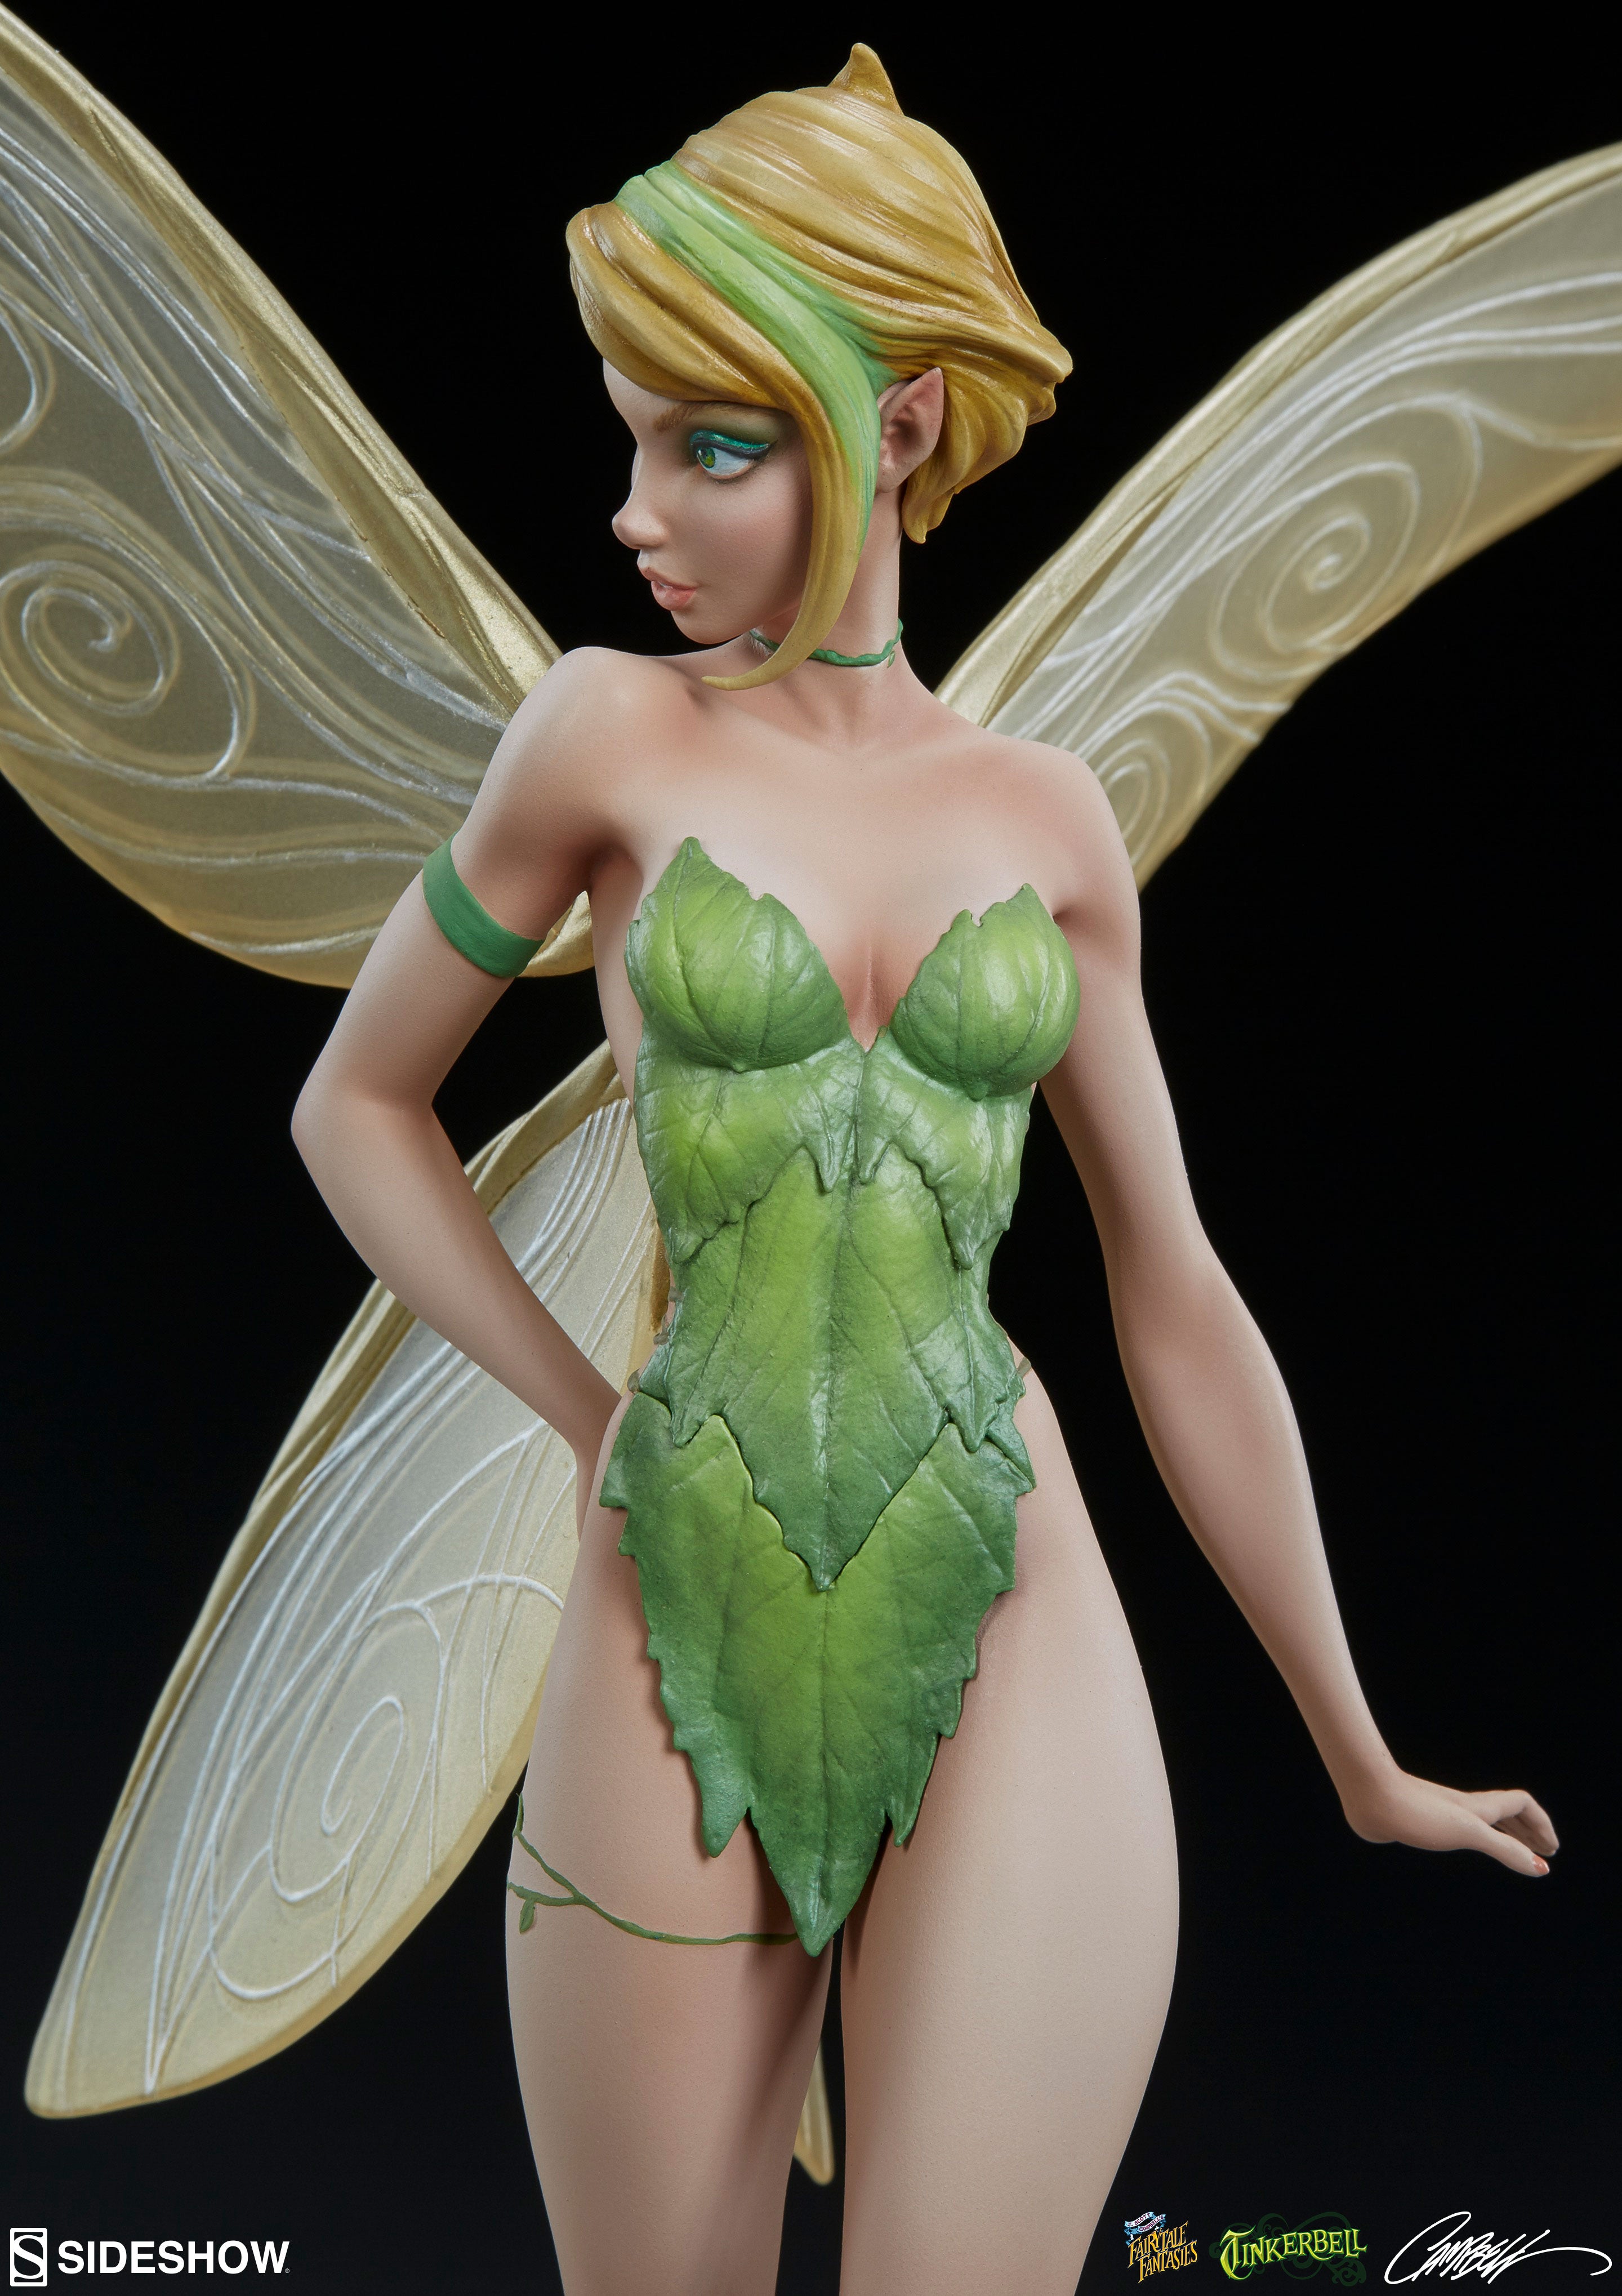 Sideshow Collectibles - J. Scott Campbell's Fairytale Fantasies Collection - Tinkerbell